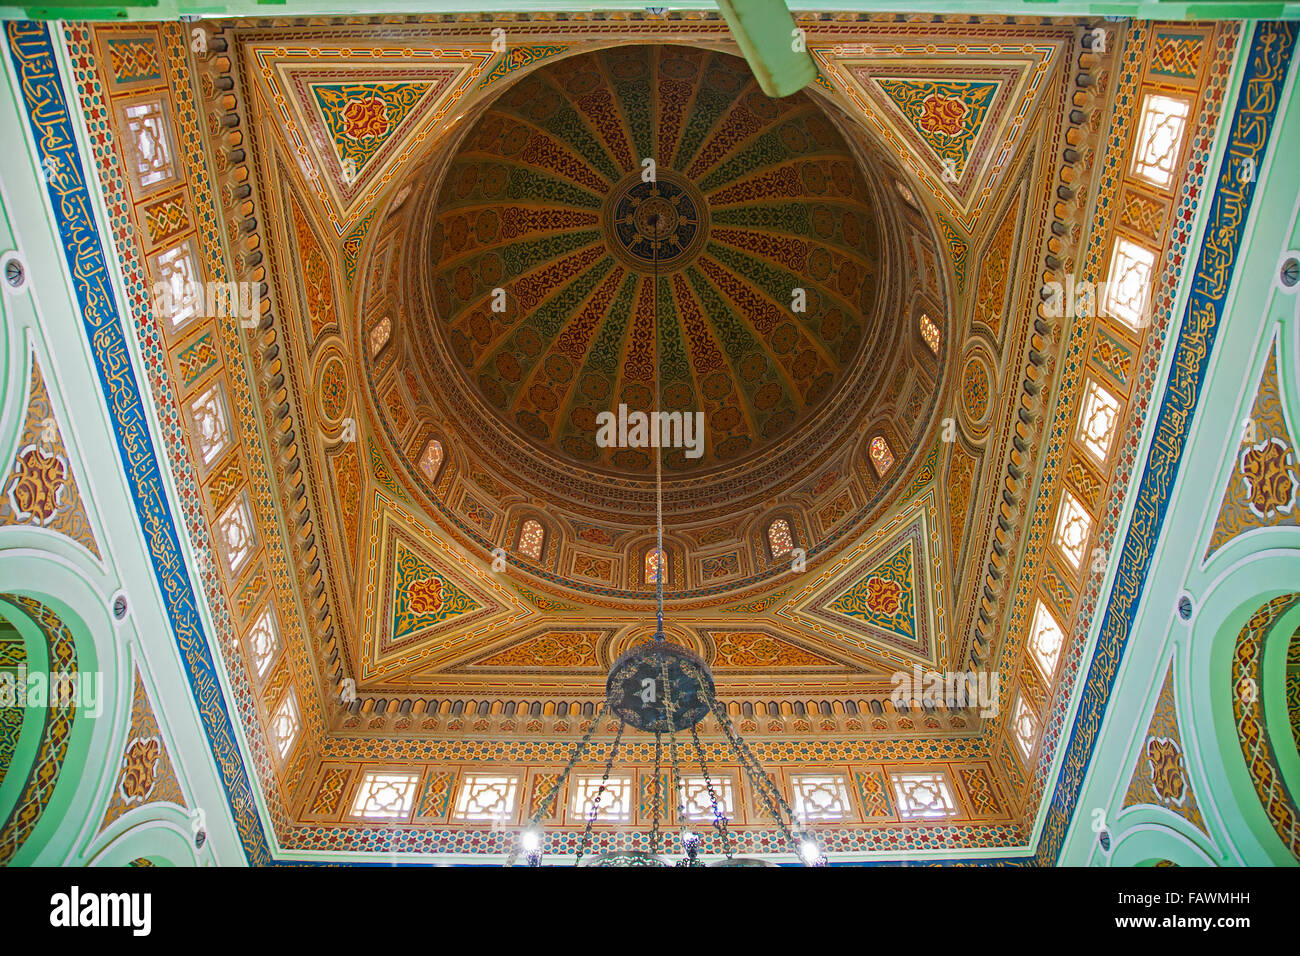 Interior of dome of the El-Tabia Mosque in Aswan, Egypt Stock Photo